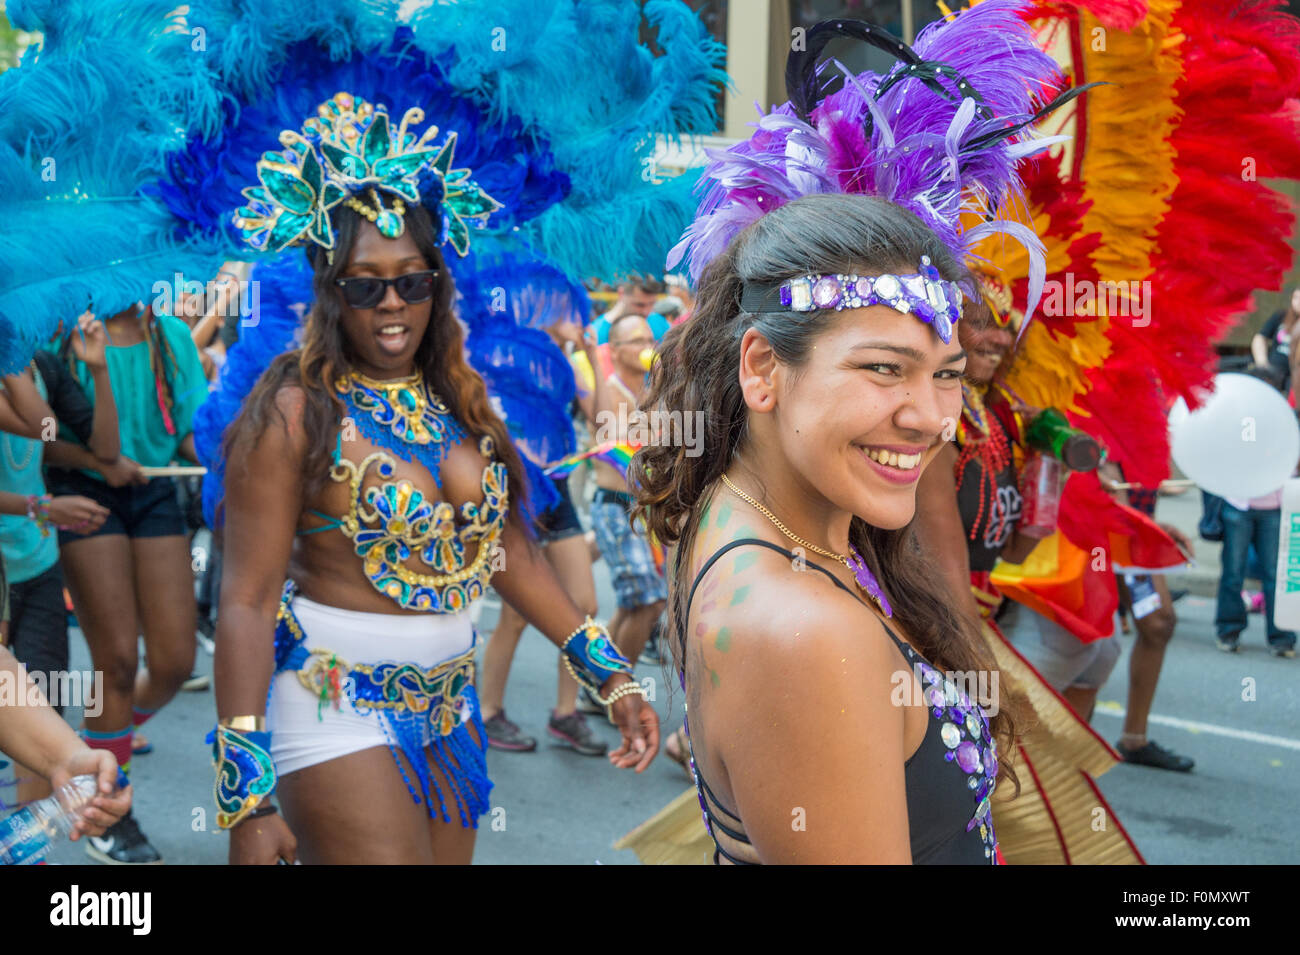 MONTREAL, CANADA, 16th August 2015. A young female dancer is smiling at the camera at the 2015 Gay Pride Parade in Montreal. © Marc Bruxelle/Alamy Live News Stock Photo